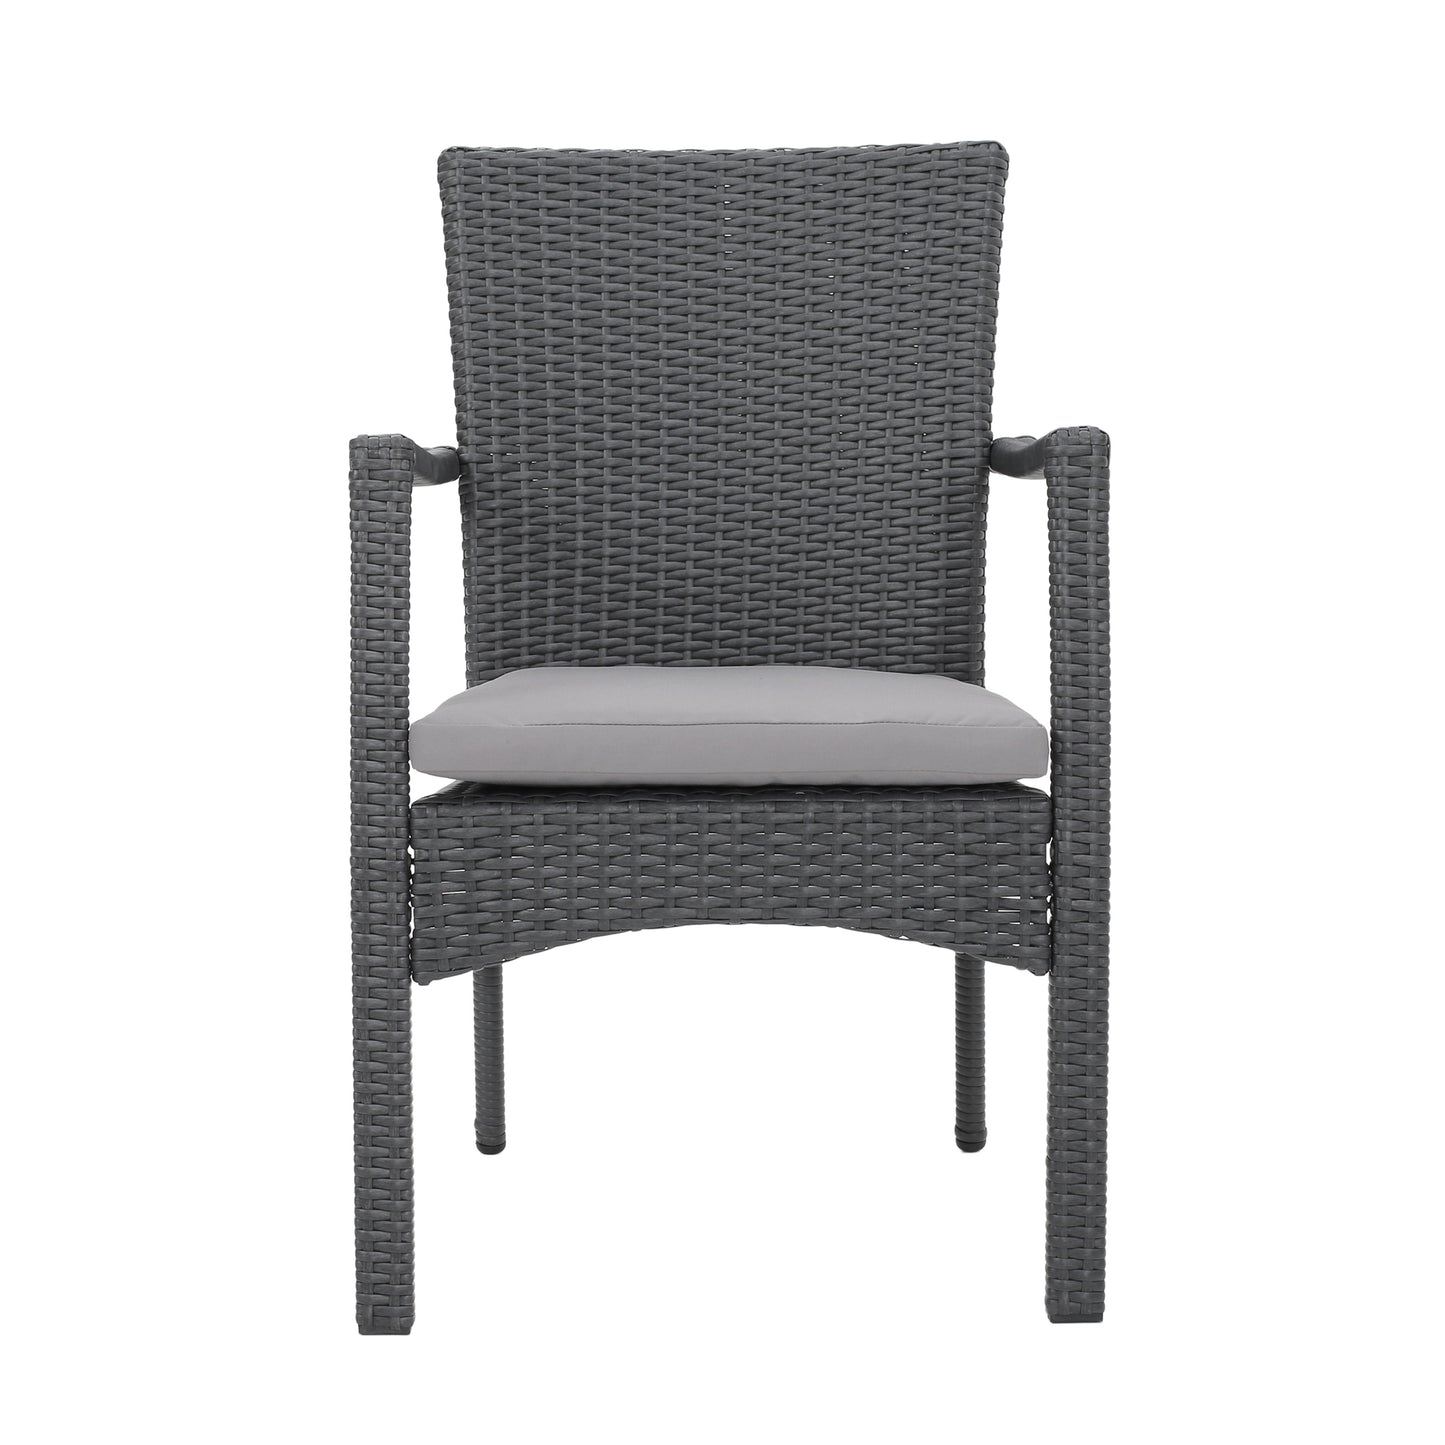 Leyam Outdoor 3 Piece Wood and Wicker Bistro Set, Gray and Gray